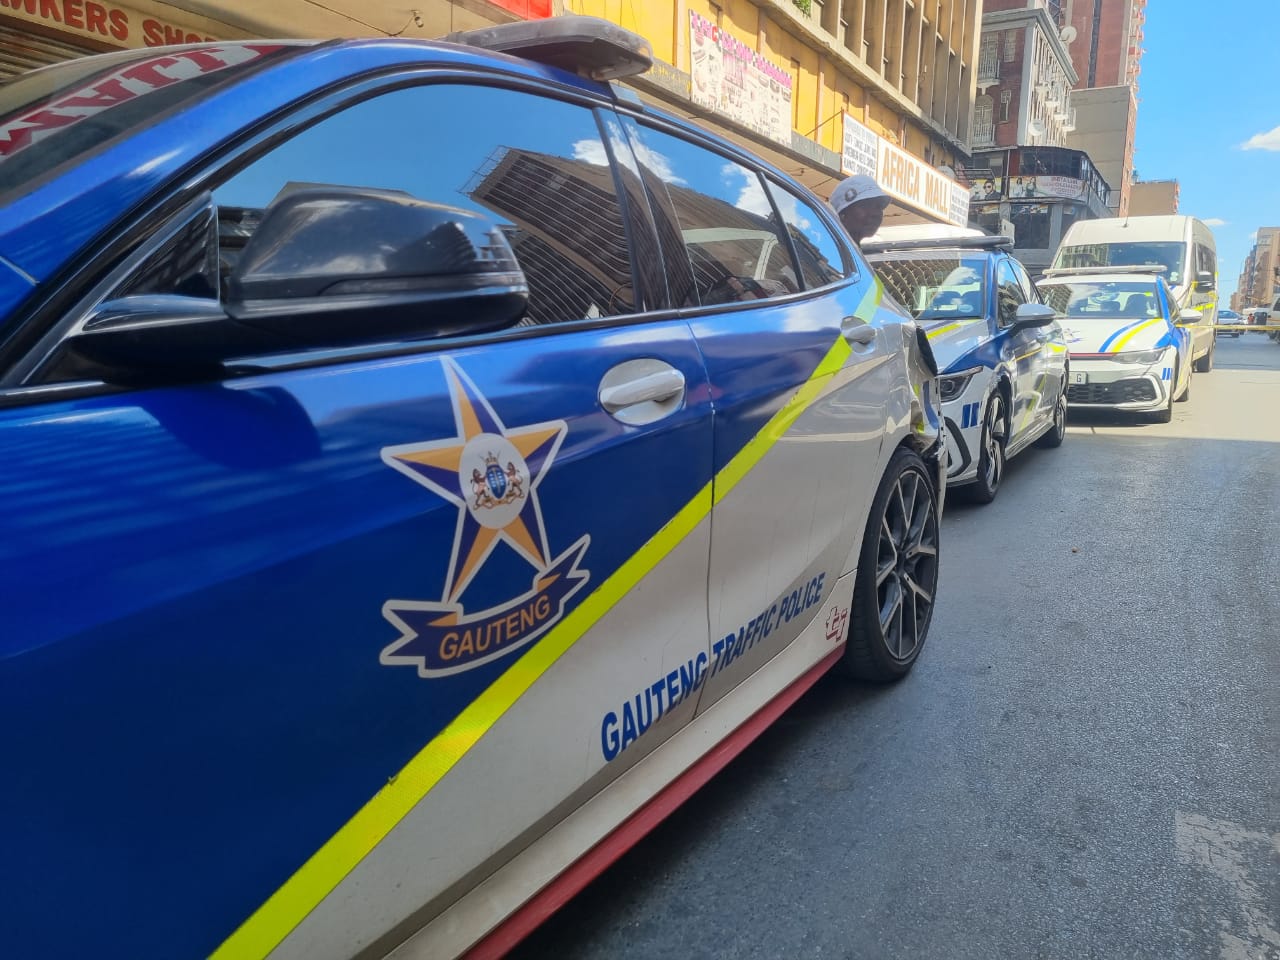 Police seize counterfeit goods worth over R17 Million within a week during various takedown operations in Johannesburg